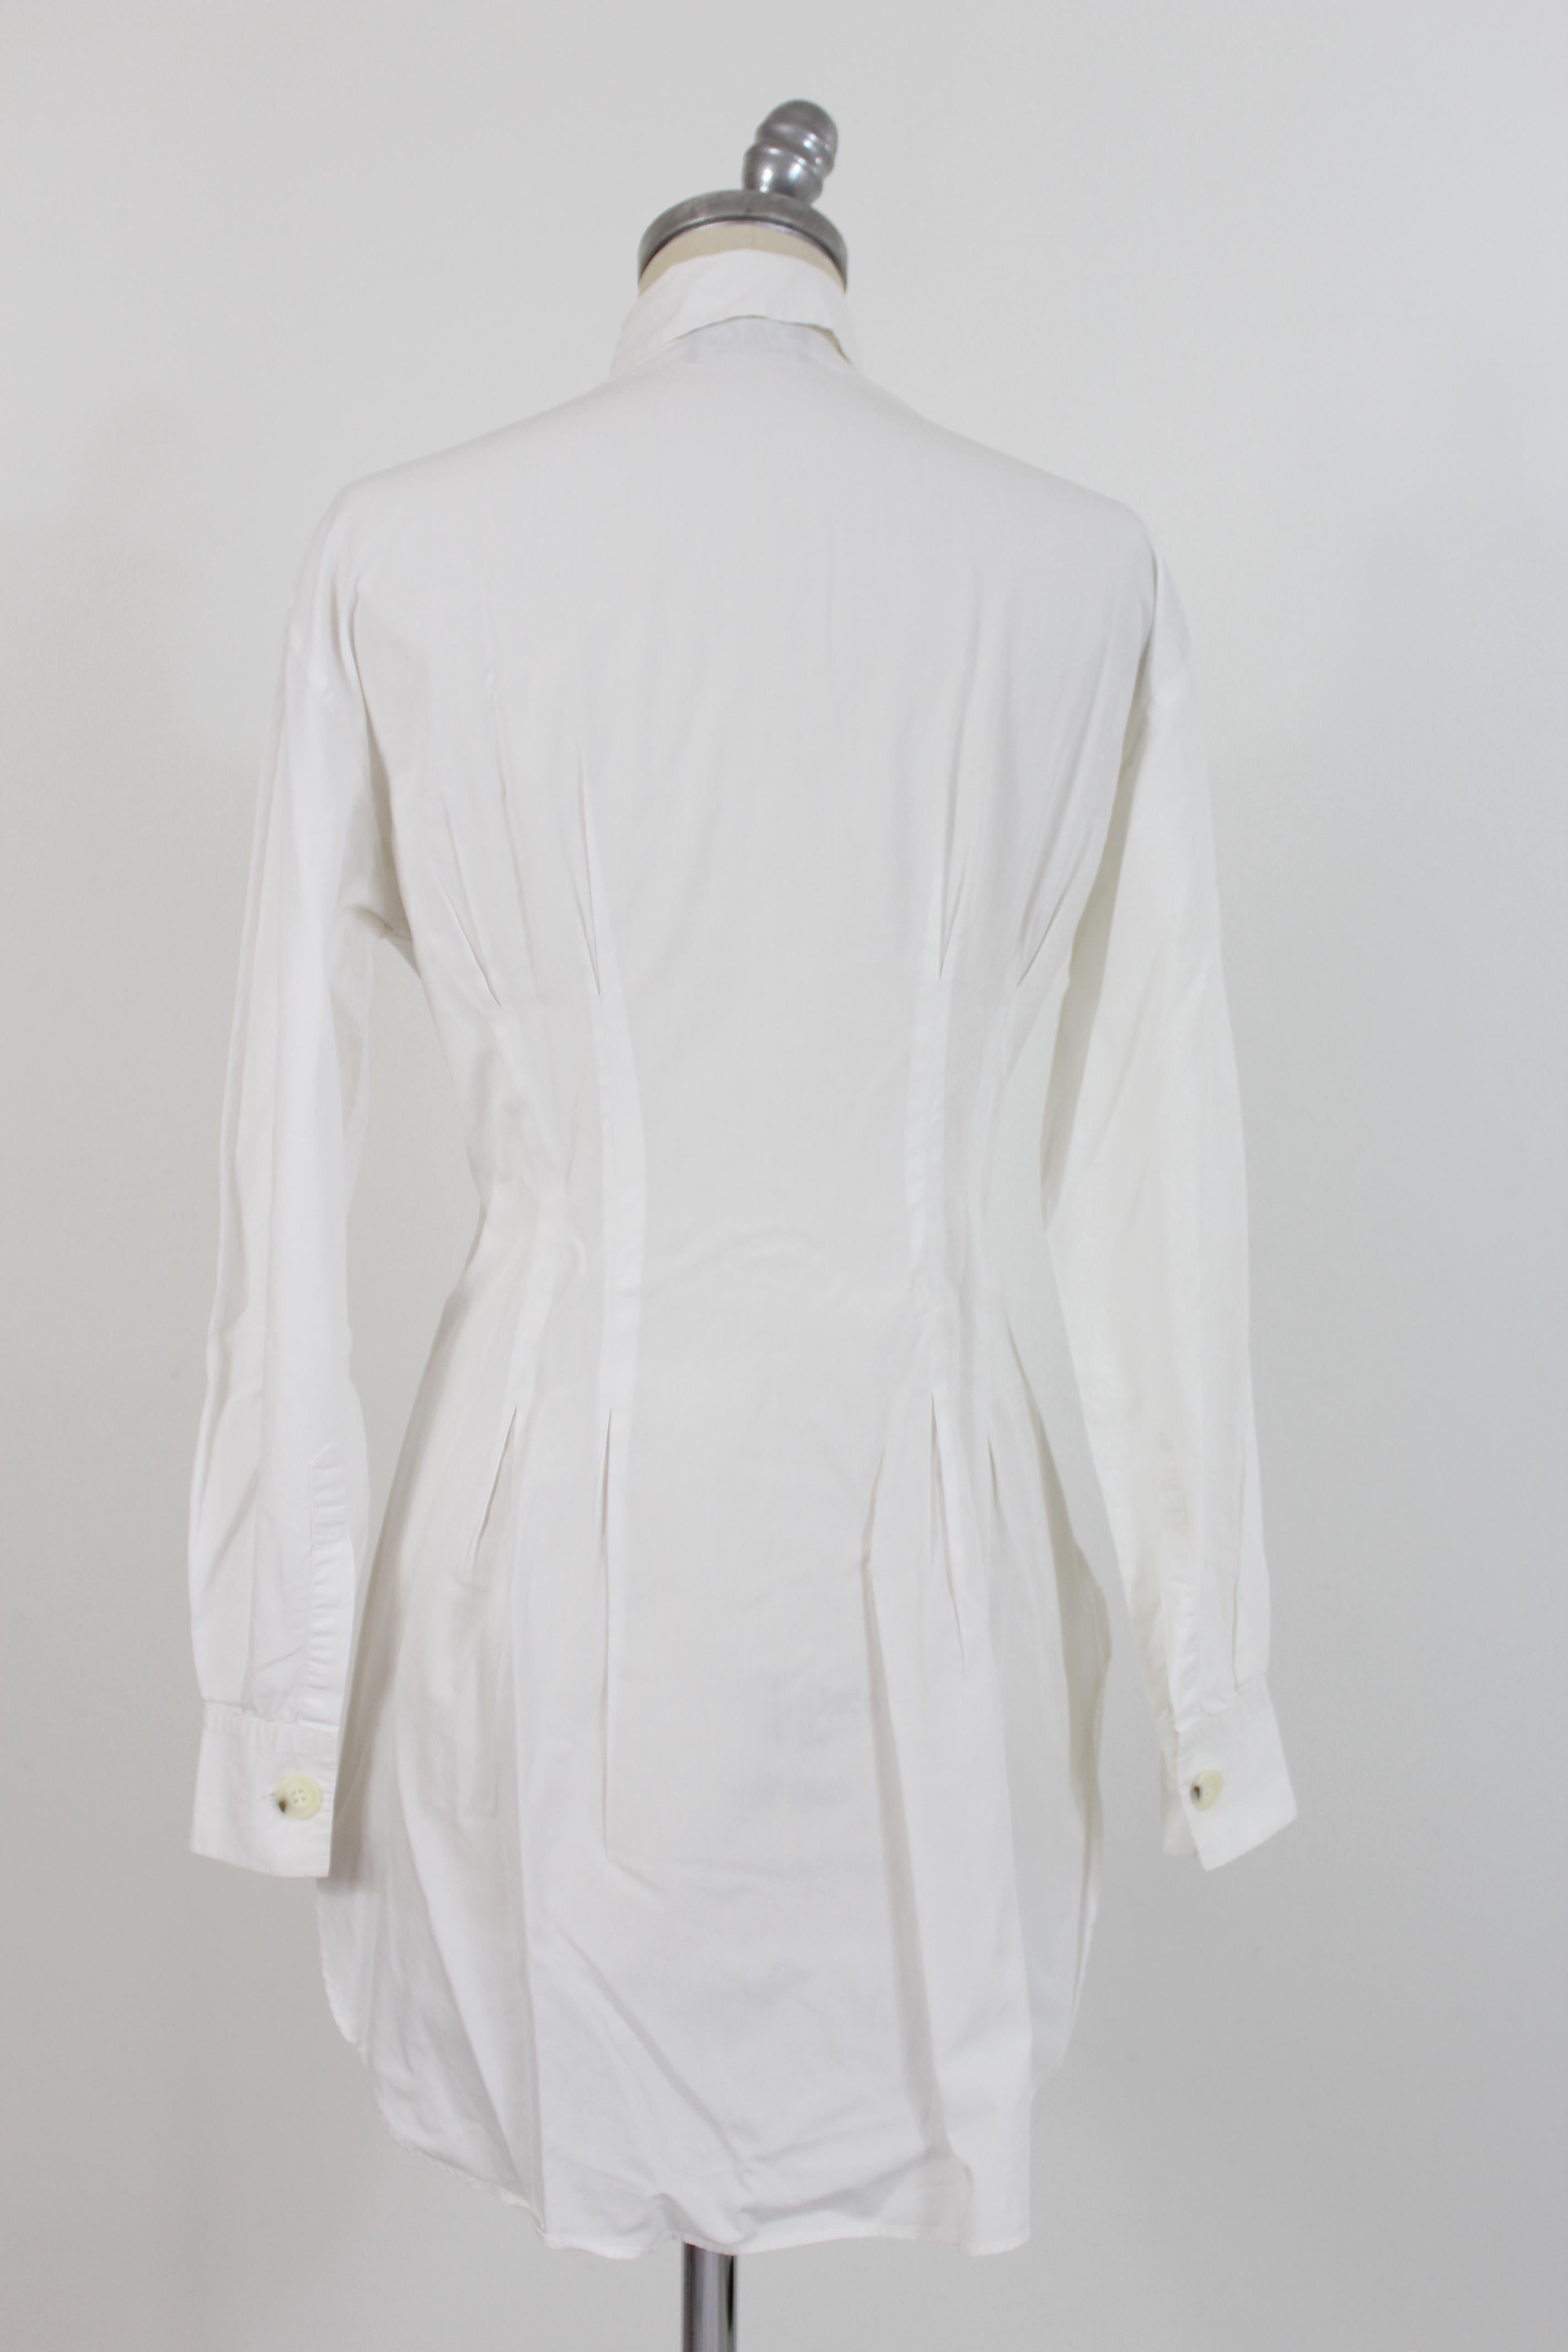 Dolce & Gabbana 2000s vintage women's chemises dress shirt. Fitted shirt, long model with tail behind. White color and elastane fabric. Made in Italy.

Condition: Excellent

Item used few times, it remains in its excellent condition. There are no